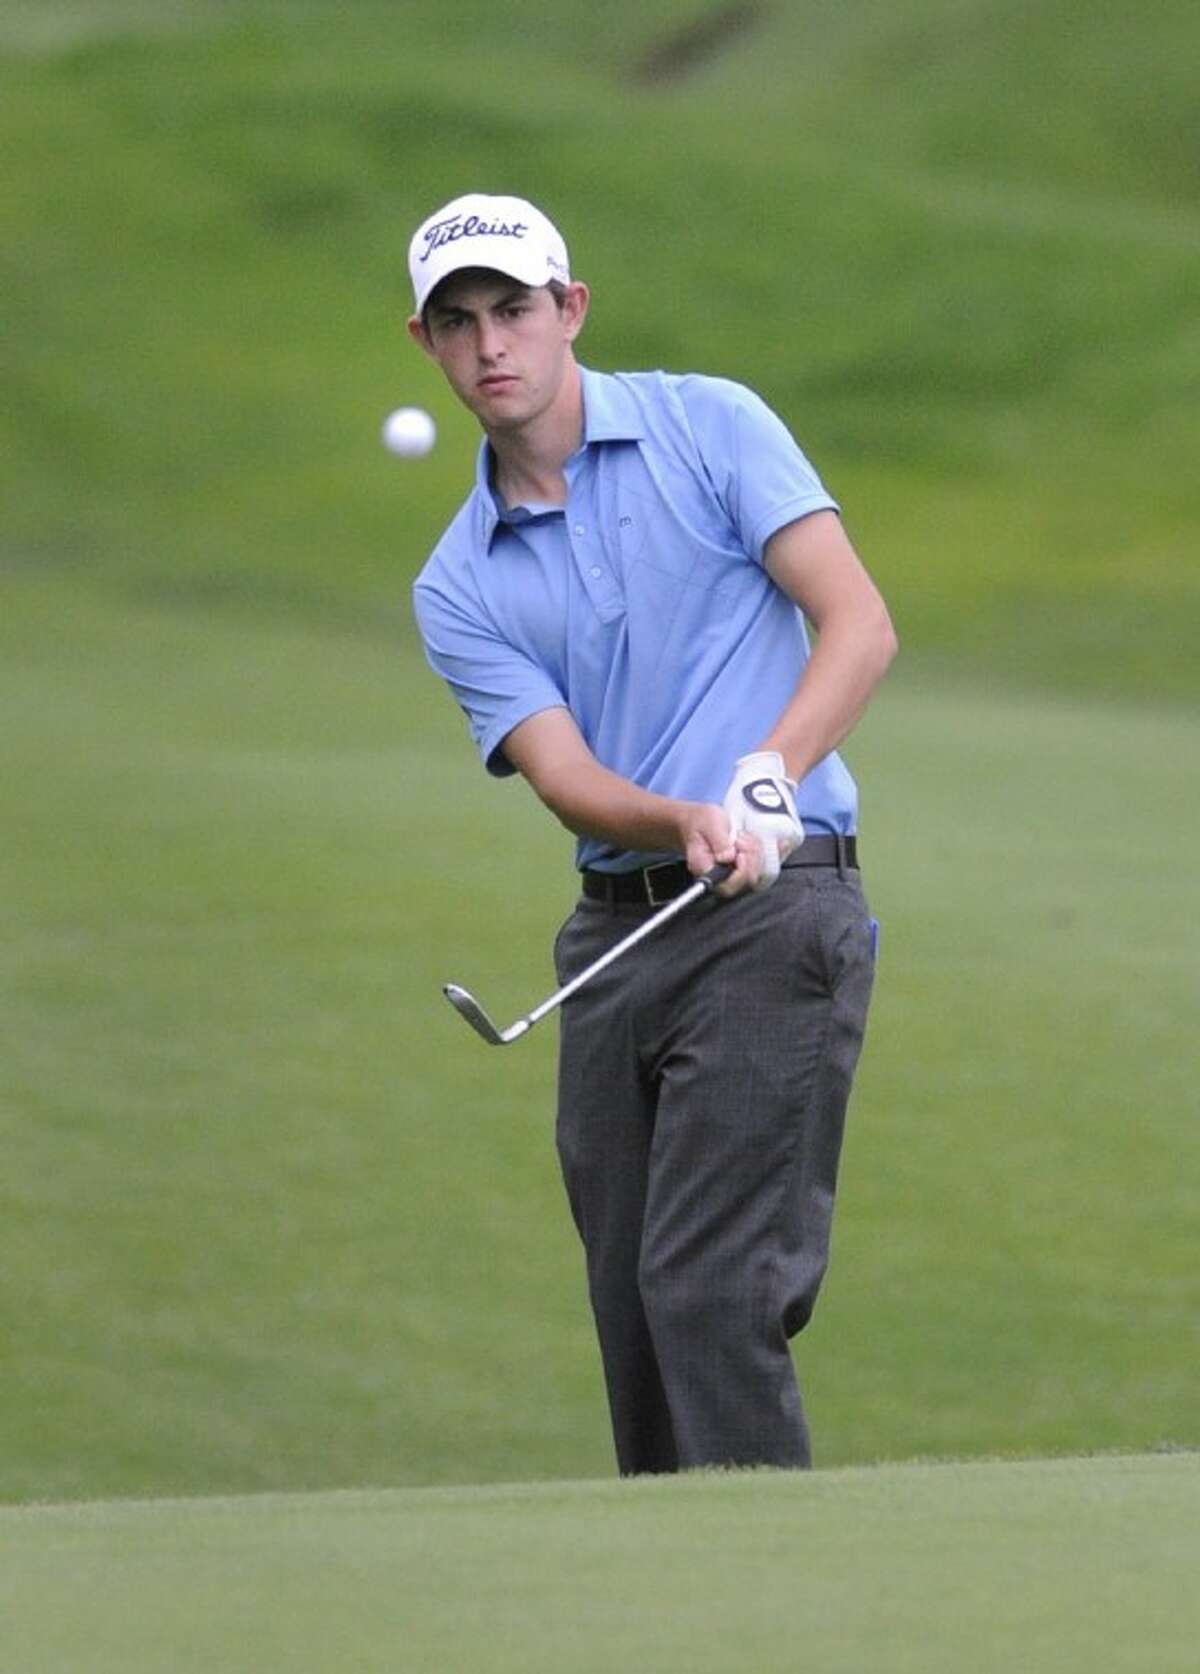 Amateur Patrick Cantlay hits his second shot on the 15th hole of his second round of the rain-delayed Travelers Championship in Cromwell, Conn., on Friday.